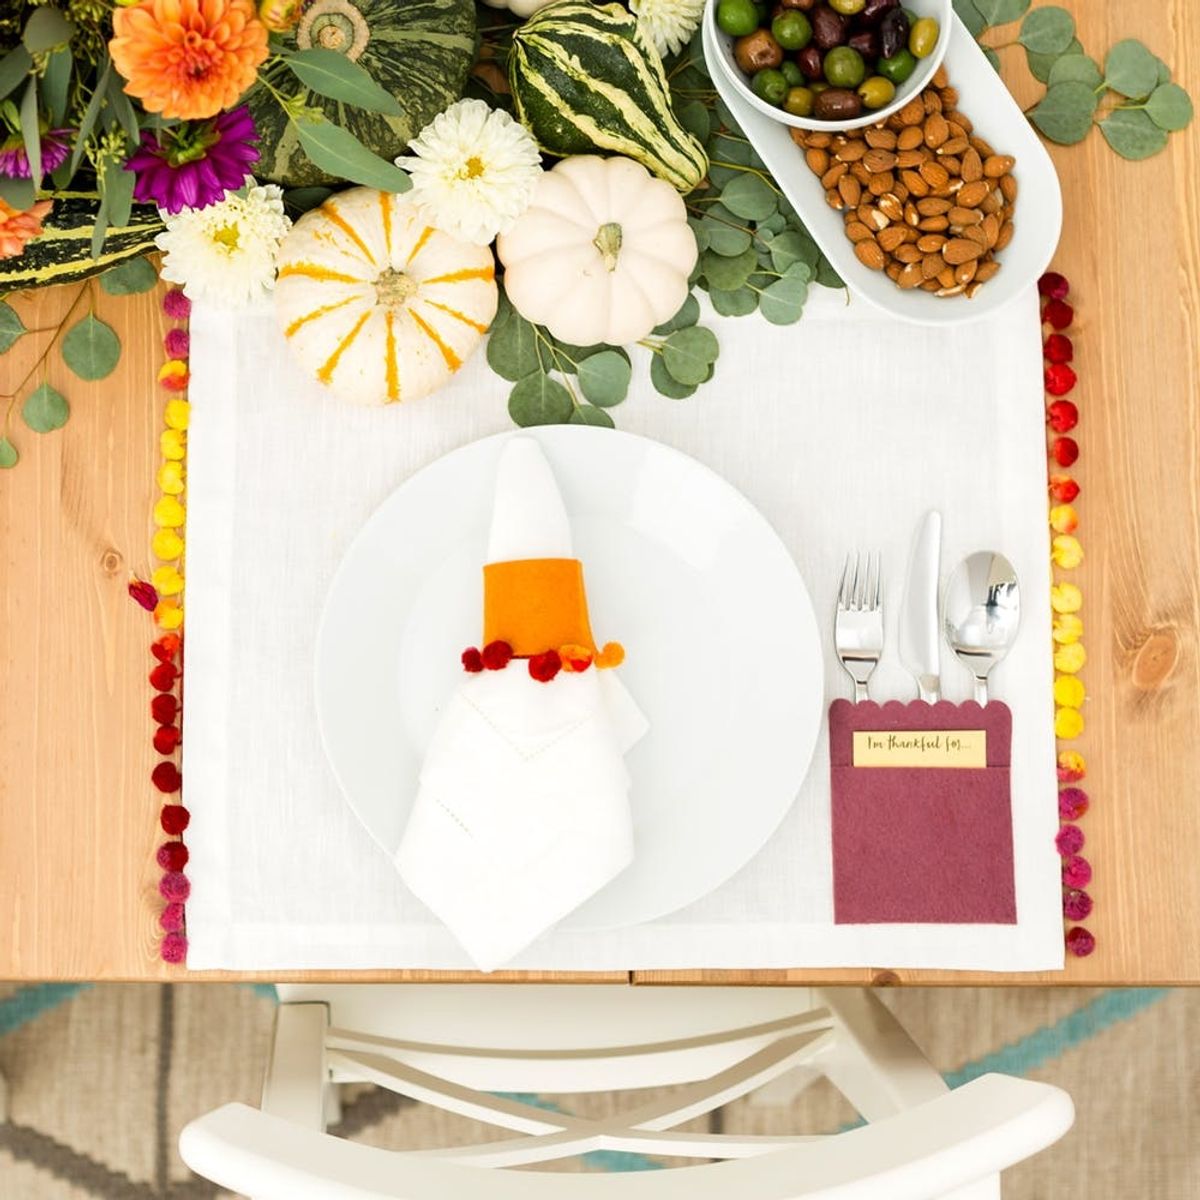 Beginner’s Guide to Preparing for Friendsgiving With IKEA